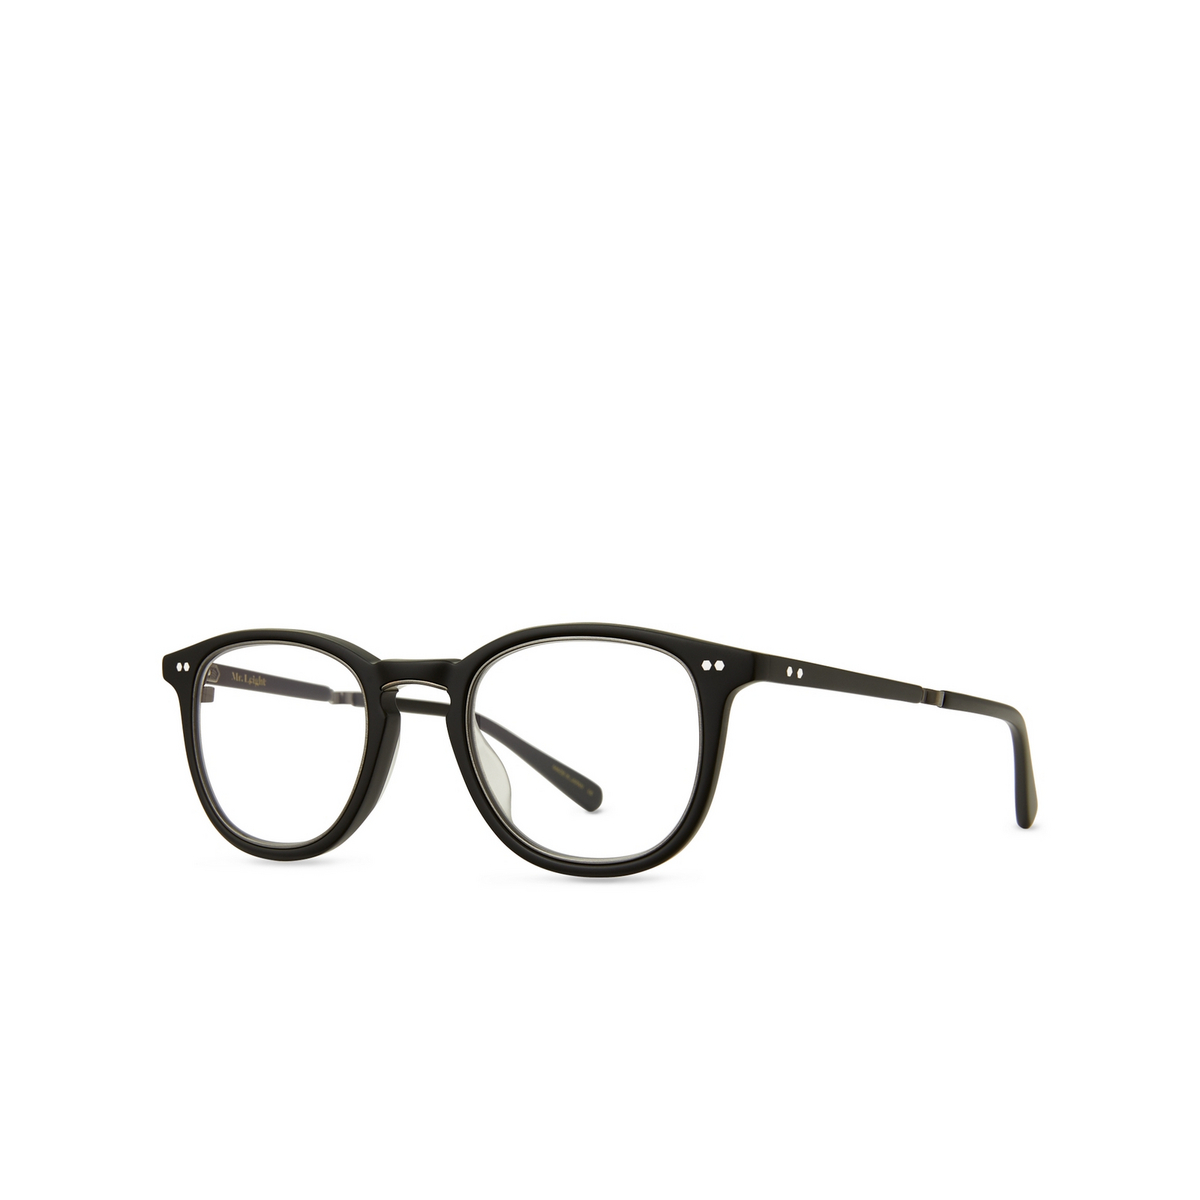 Mr. Leight COOPERS C Eyeglasses MBK-PW Matte Black-Pewter - product thumbnail 2/3